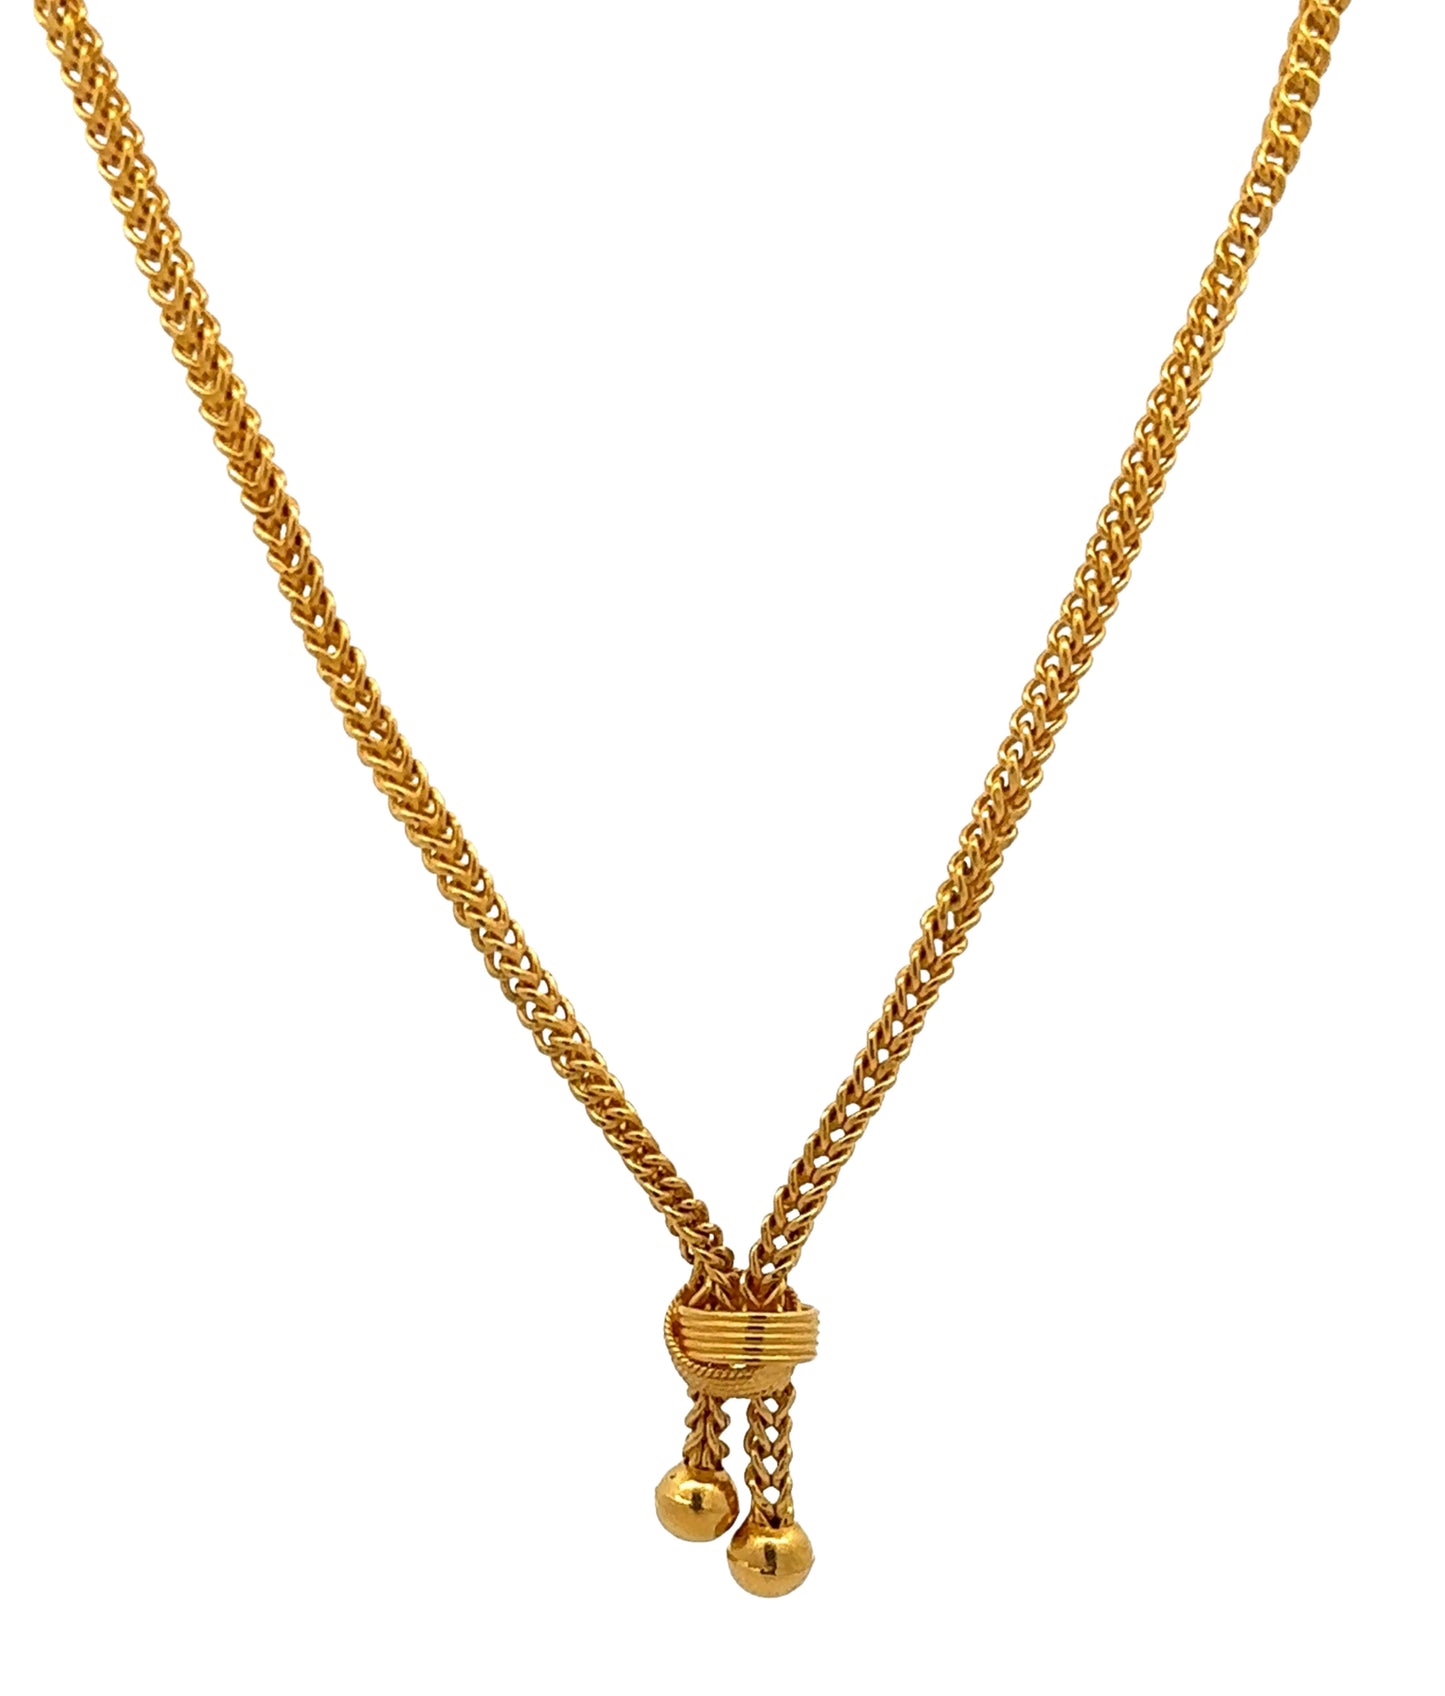 22k yellow gold hanging braided franco chain with 2 balls at the end